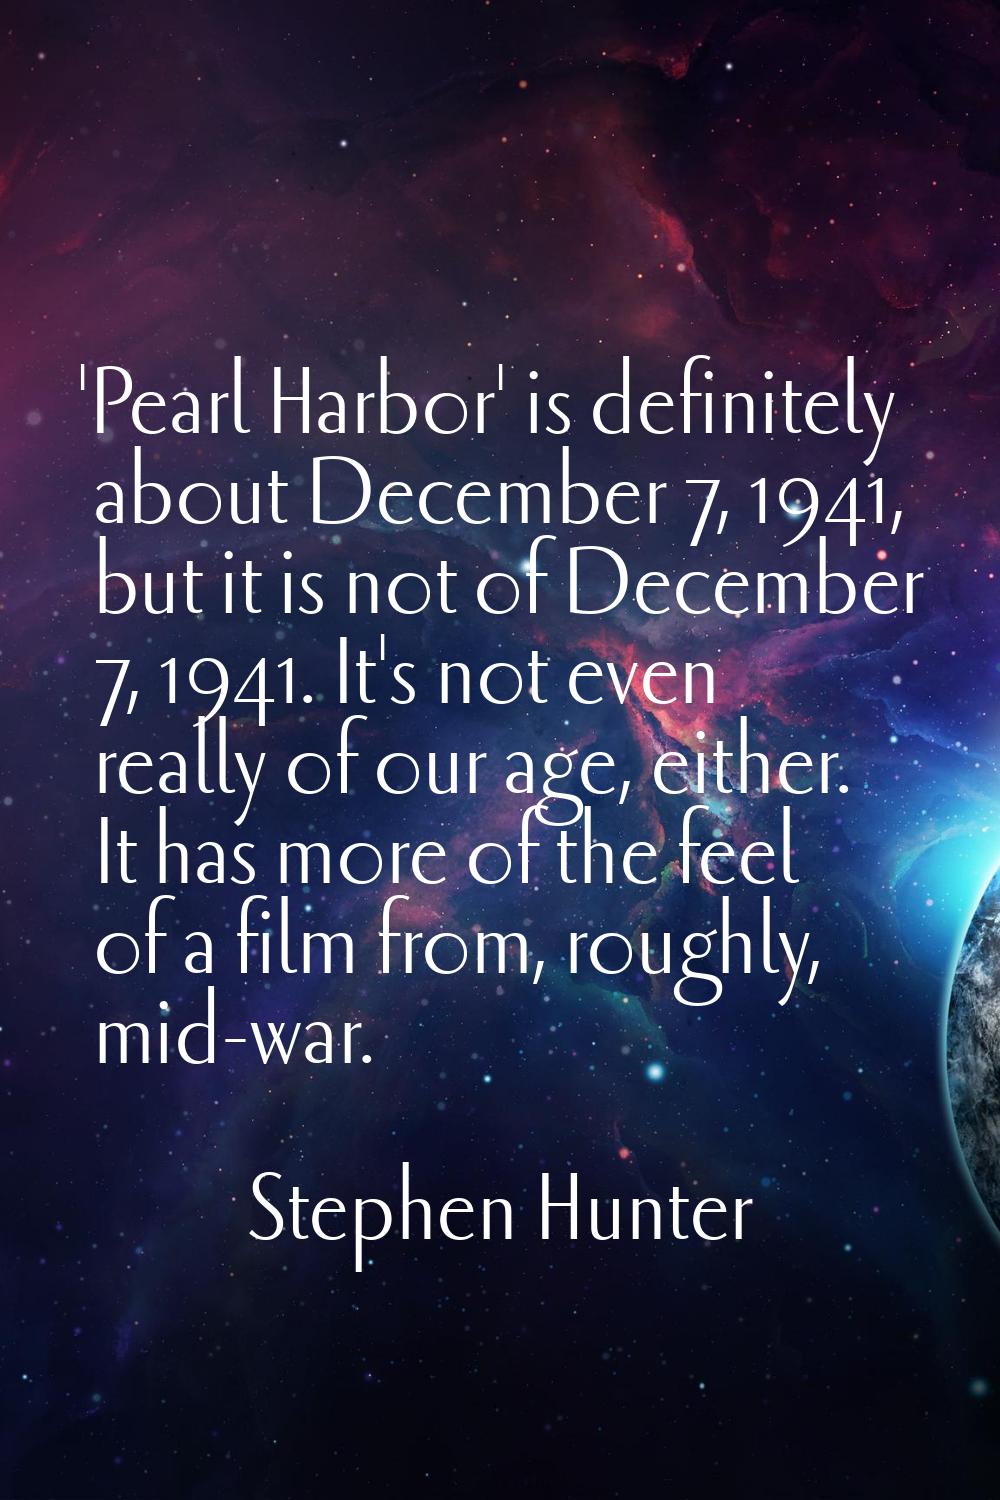 'Pearl Harbor' is definitely about December 7, 1941, but it is not of December 7, 1941. It's not ev